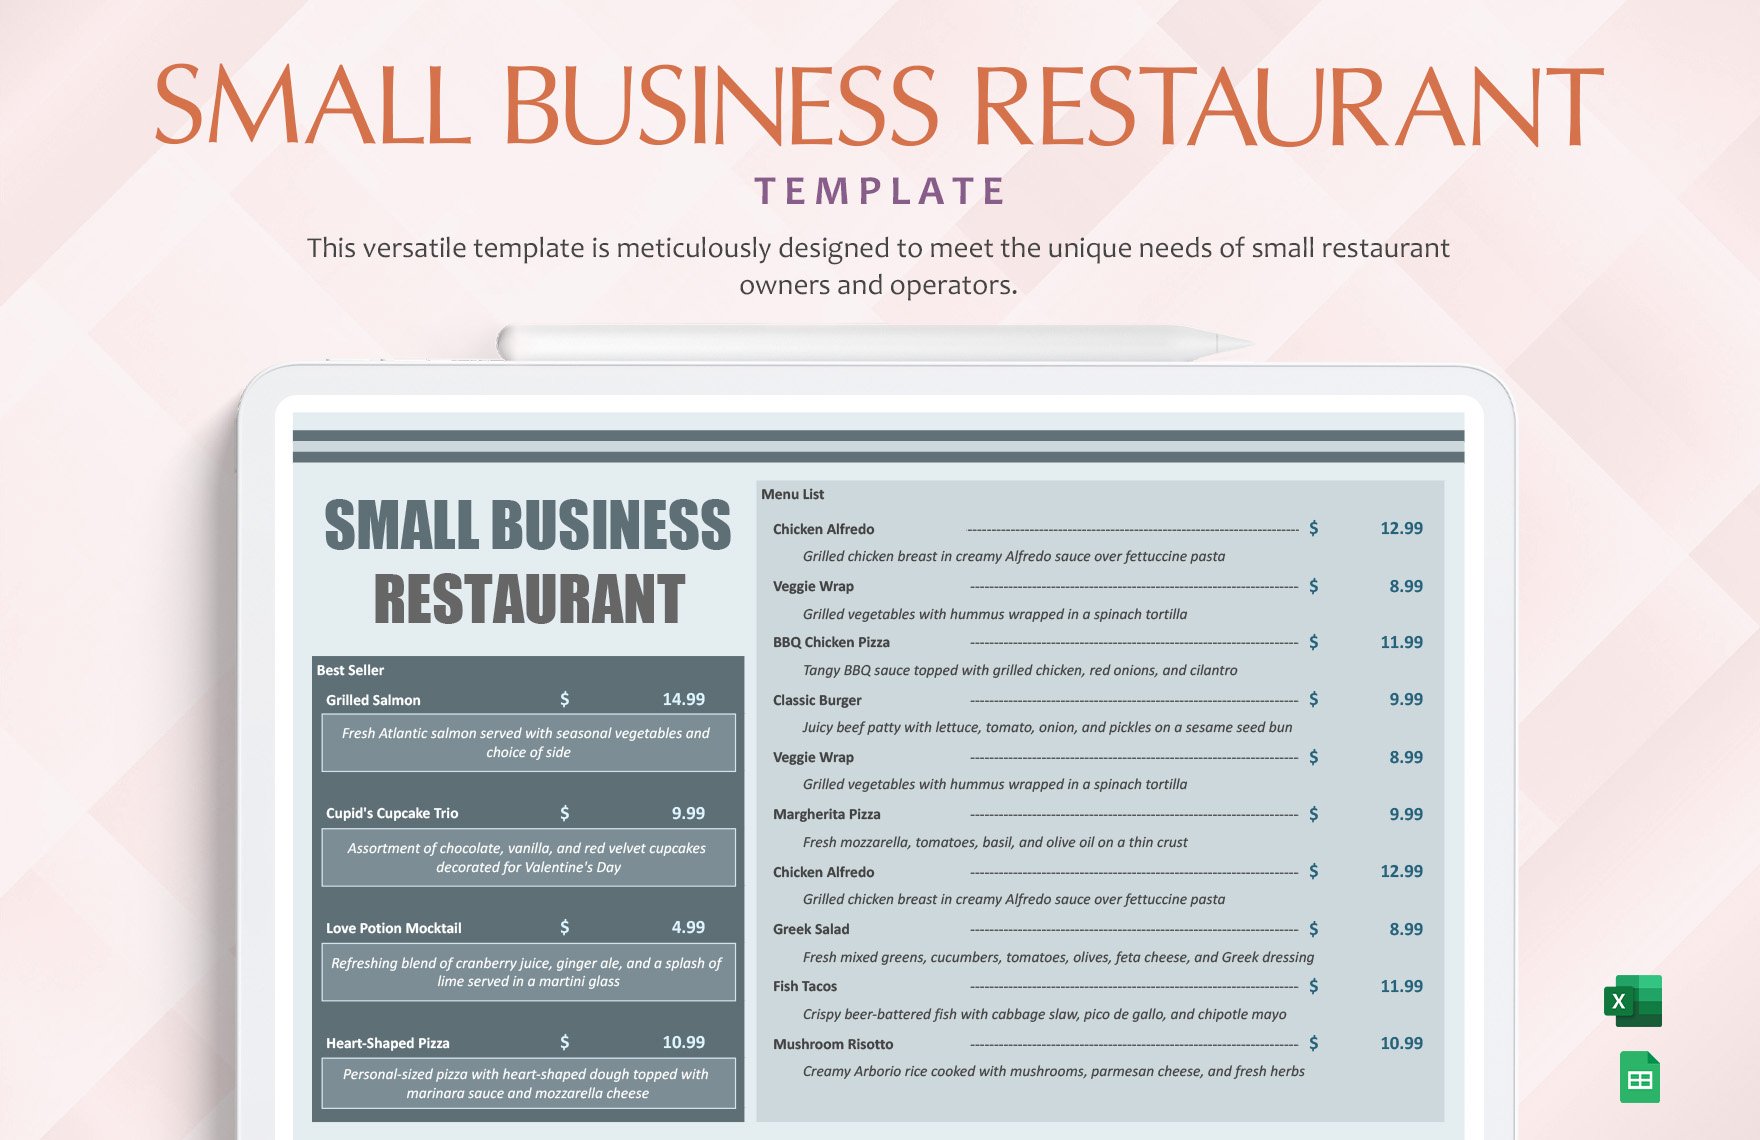 Small Business Restaurant Template in Excel, Google Sheets